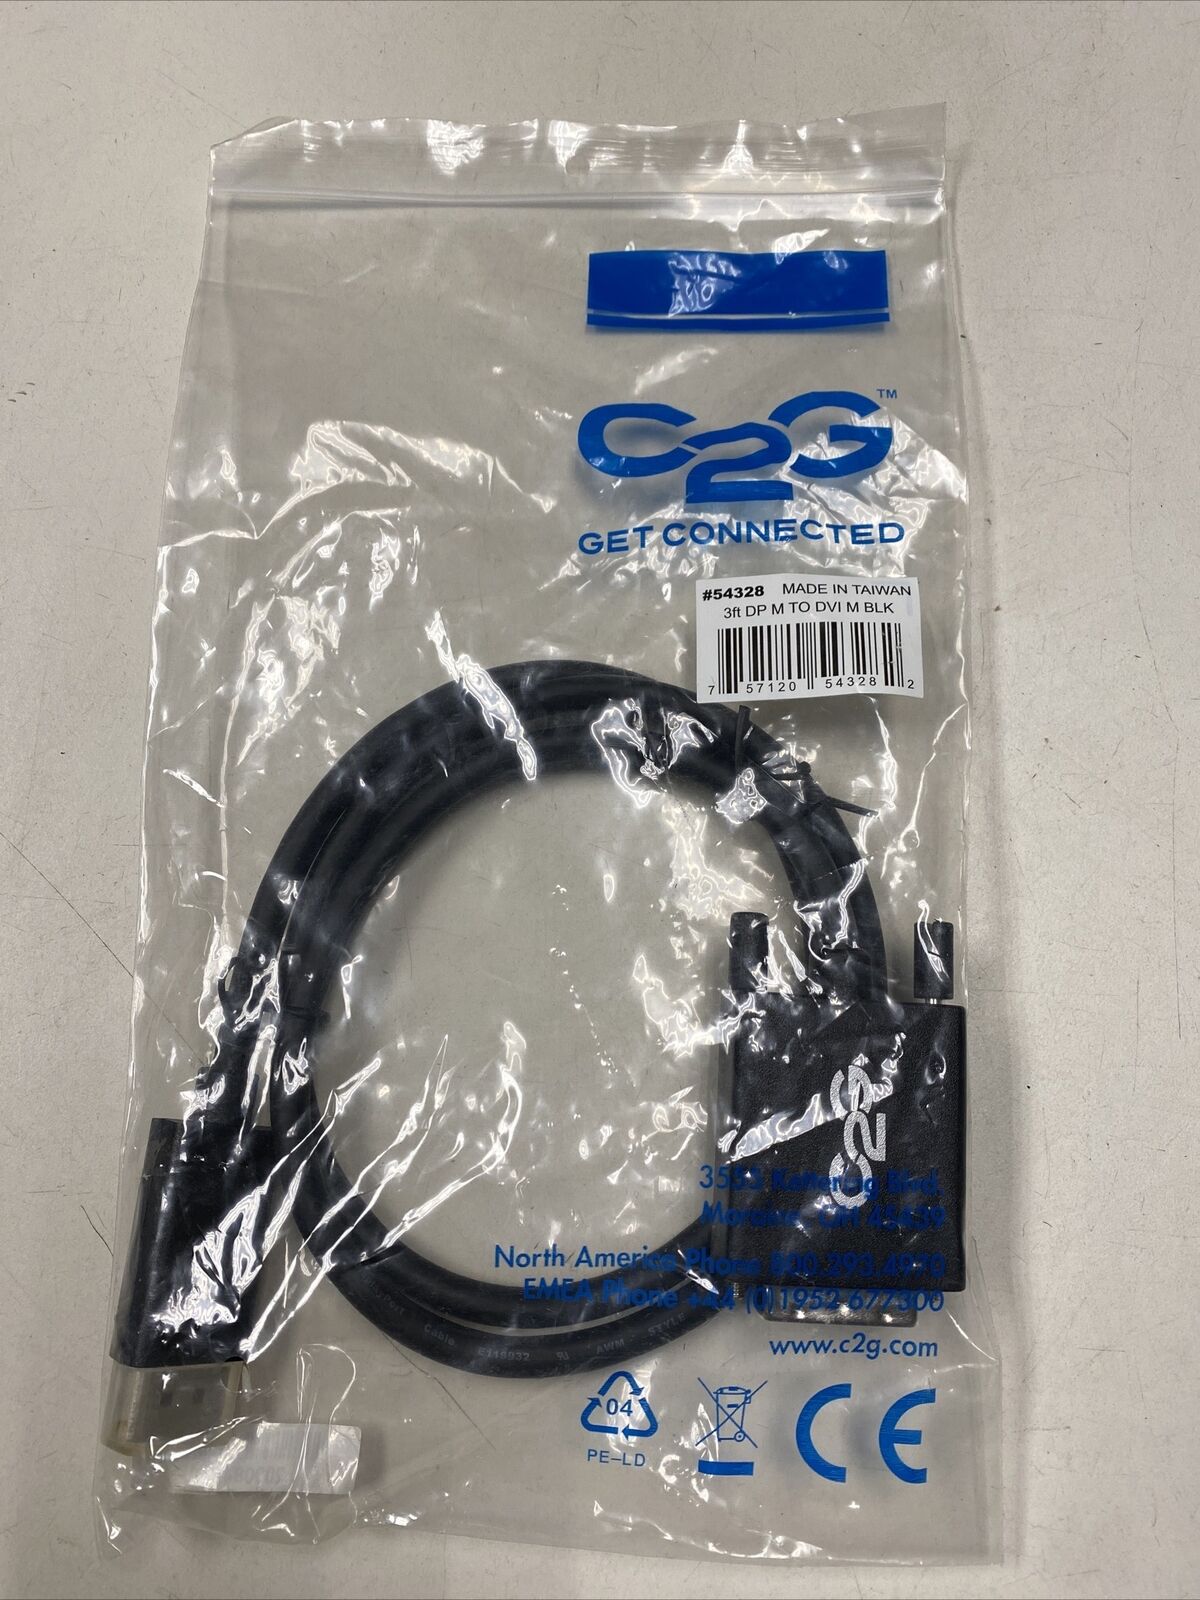 Lot of 10 C2G 54328 3ft DisplayPort to DVI Adapter Cable -DVI-D Single